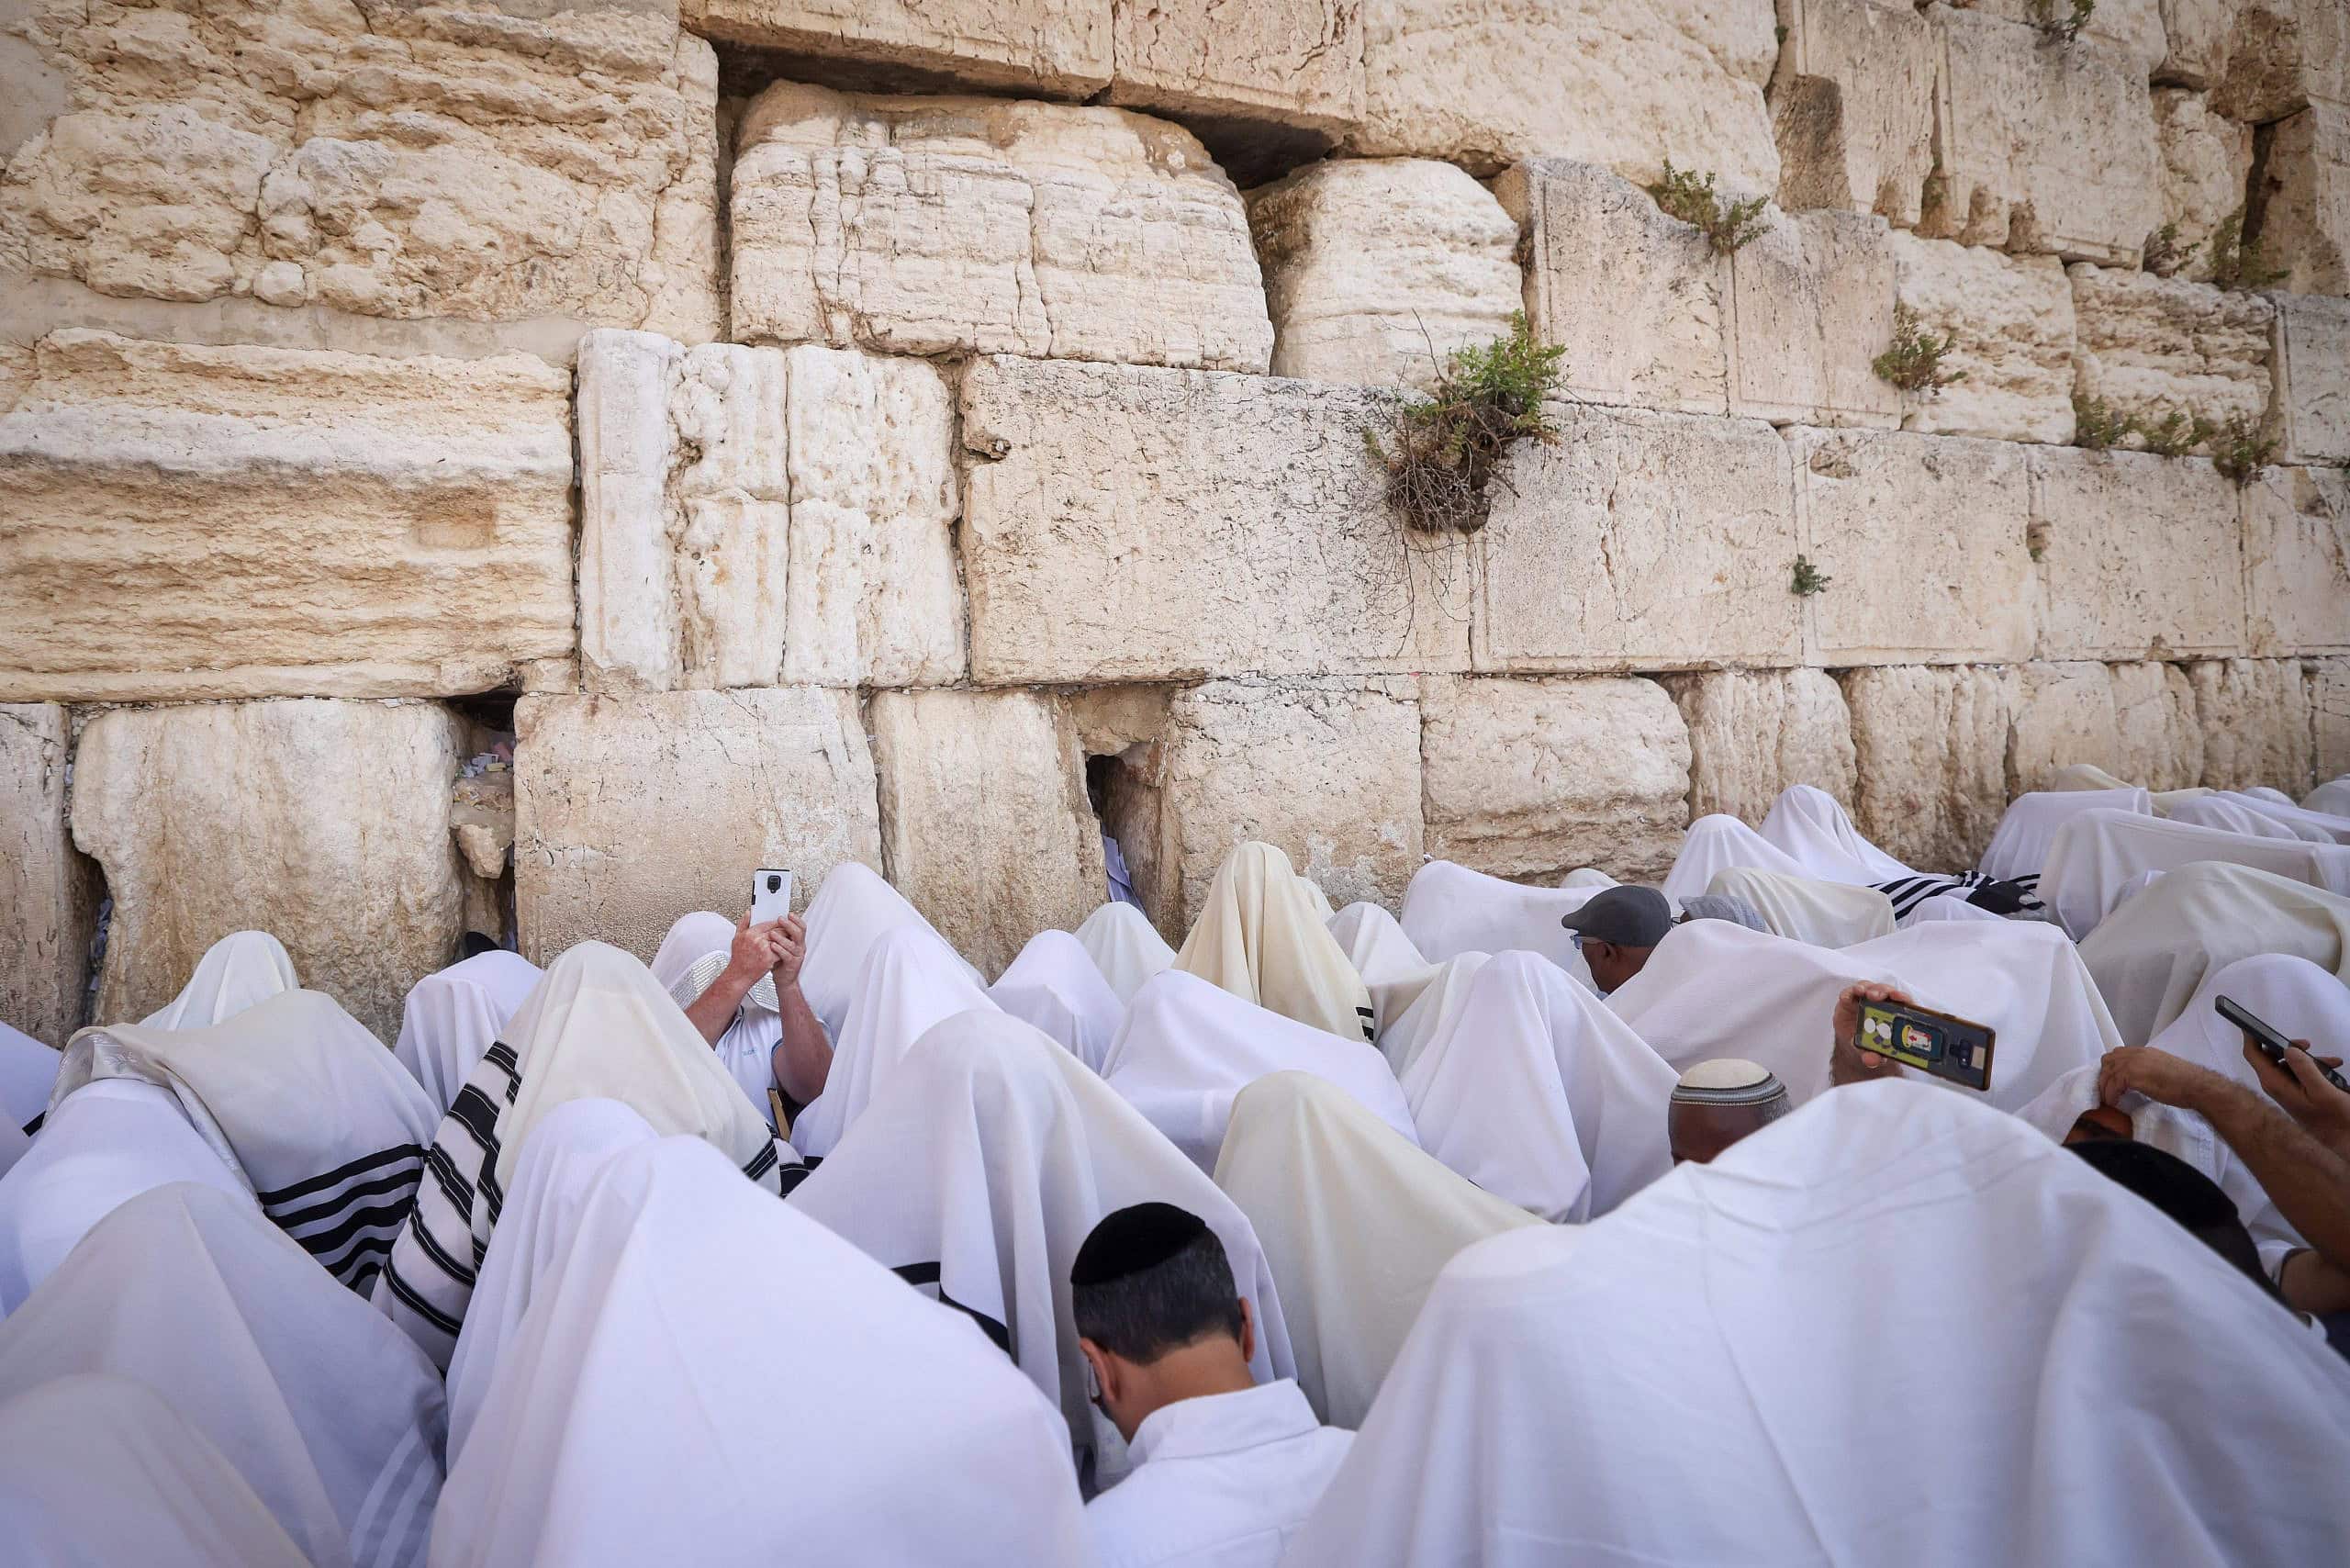 Ben-Gvir visits Temple Mount during priestly blessing ceremony